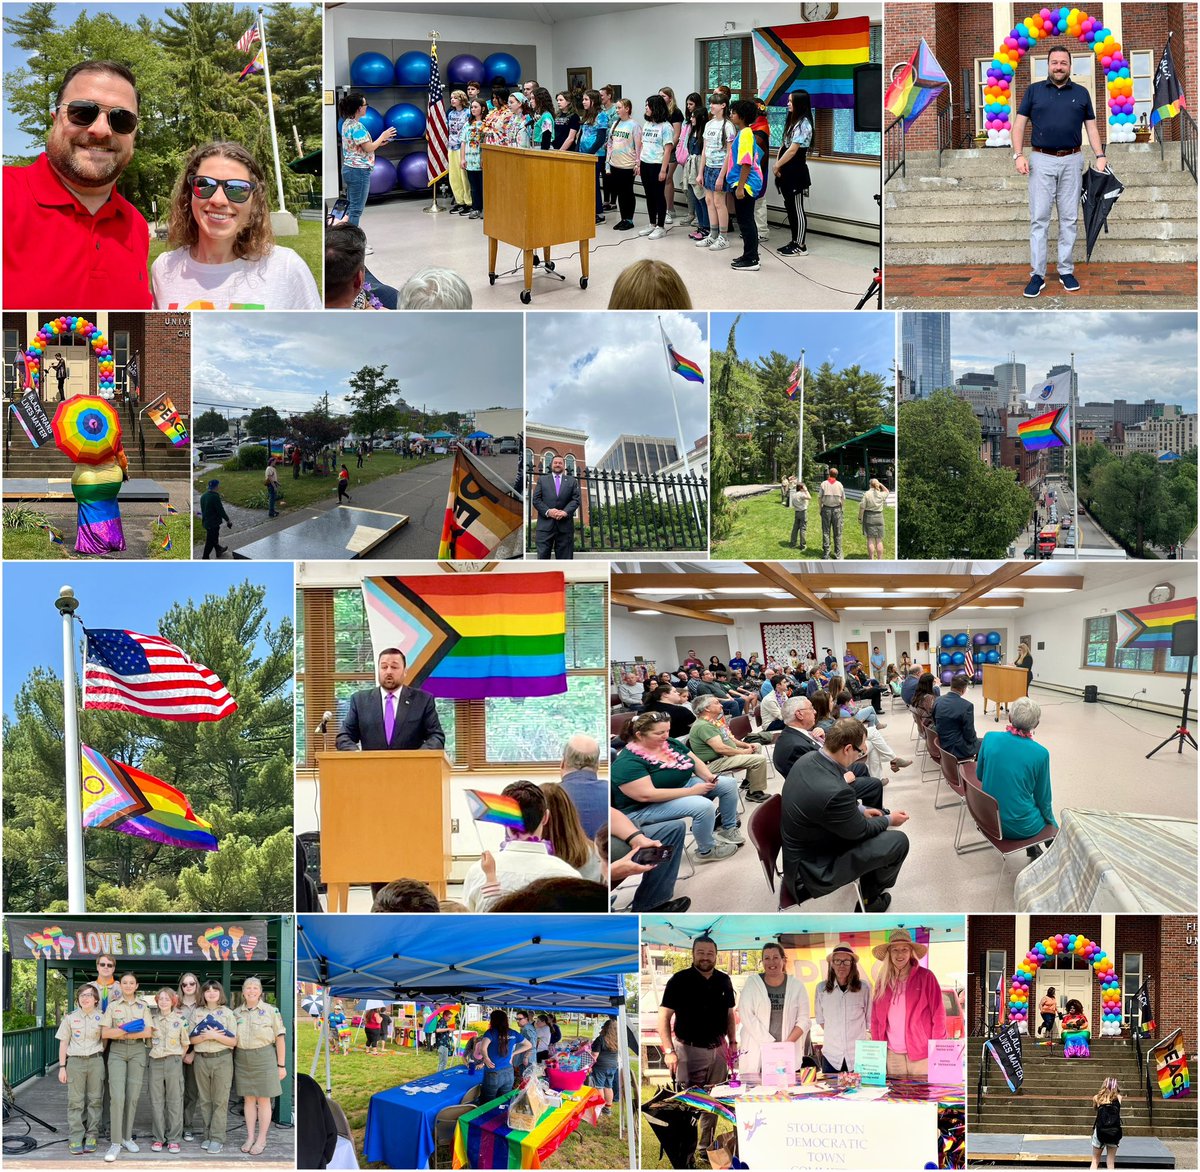 This week, I attended Pride events in Mansfield, Stoughton, & Sharon to celebrate love & authenticity across the 8th Norfolk. Each has grown every year, which is a testament to both the message & the people who work so hard to make these celebrations happen. Happy Pride!!! 🏳️‍🌈🏳️‍⚧️